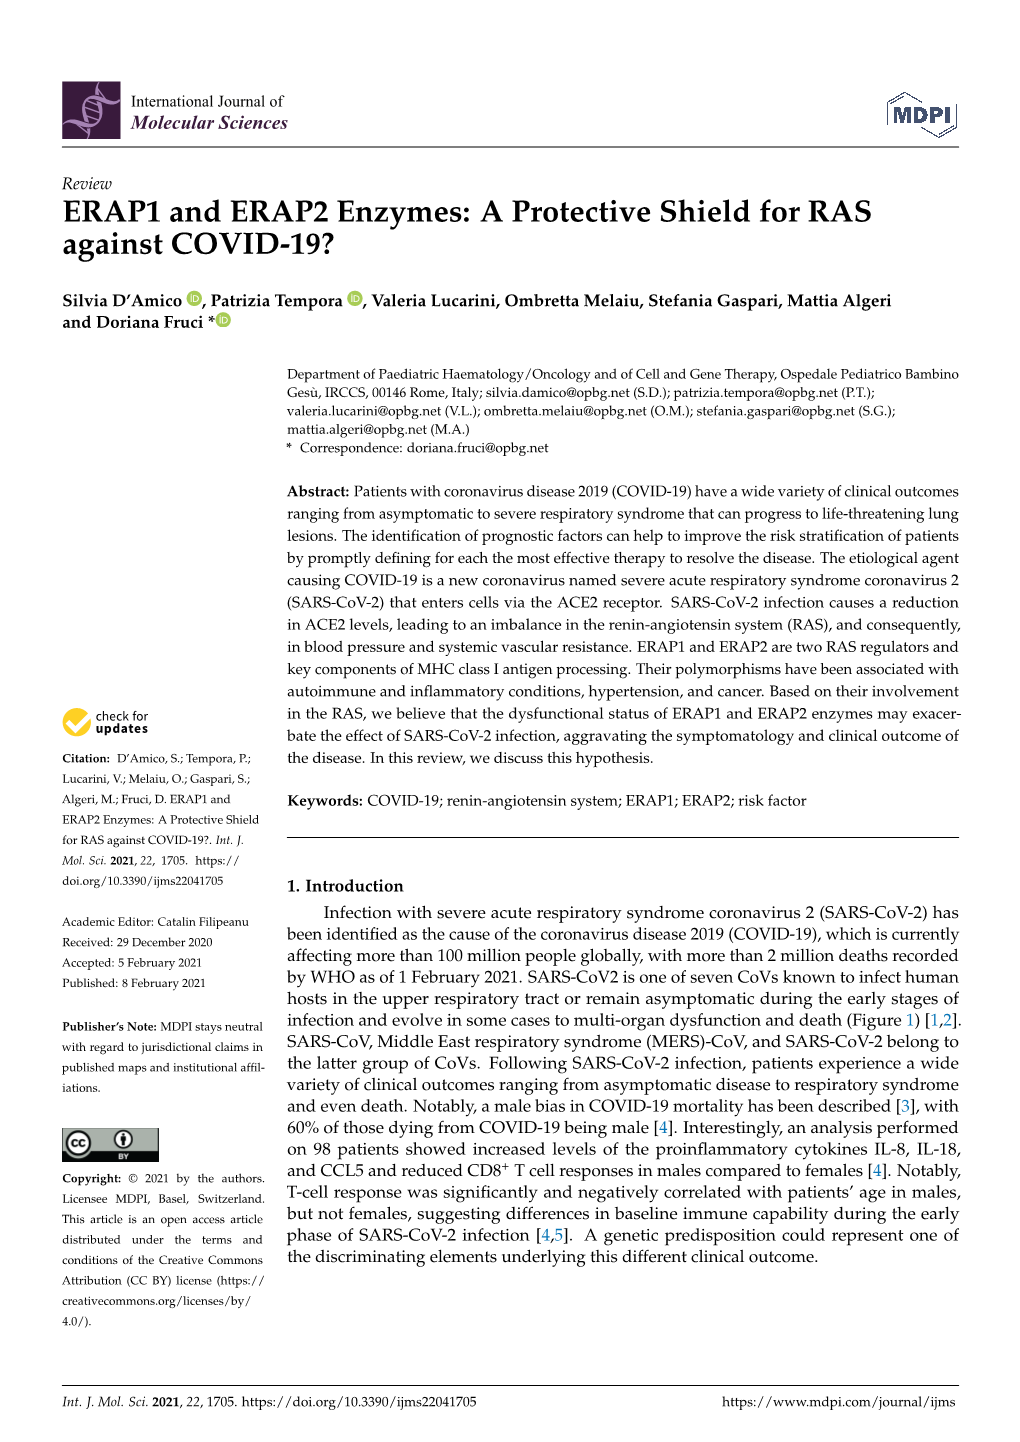 ERAP1 and ERAP2 Enzymes: a Protective Shield for RAS Against COVID-19?